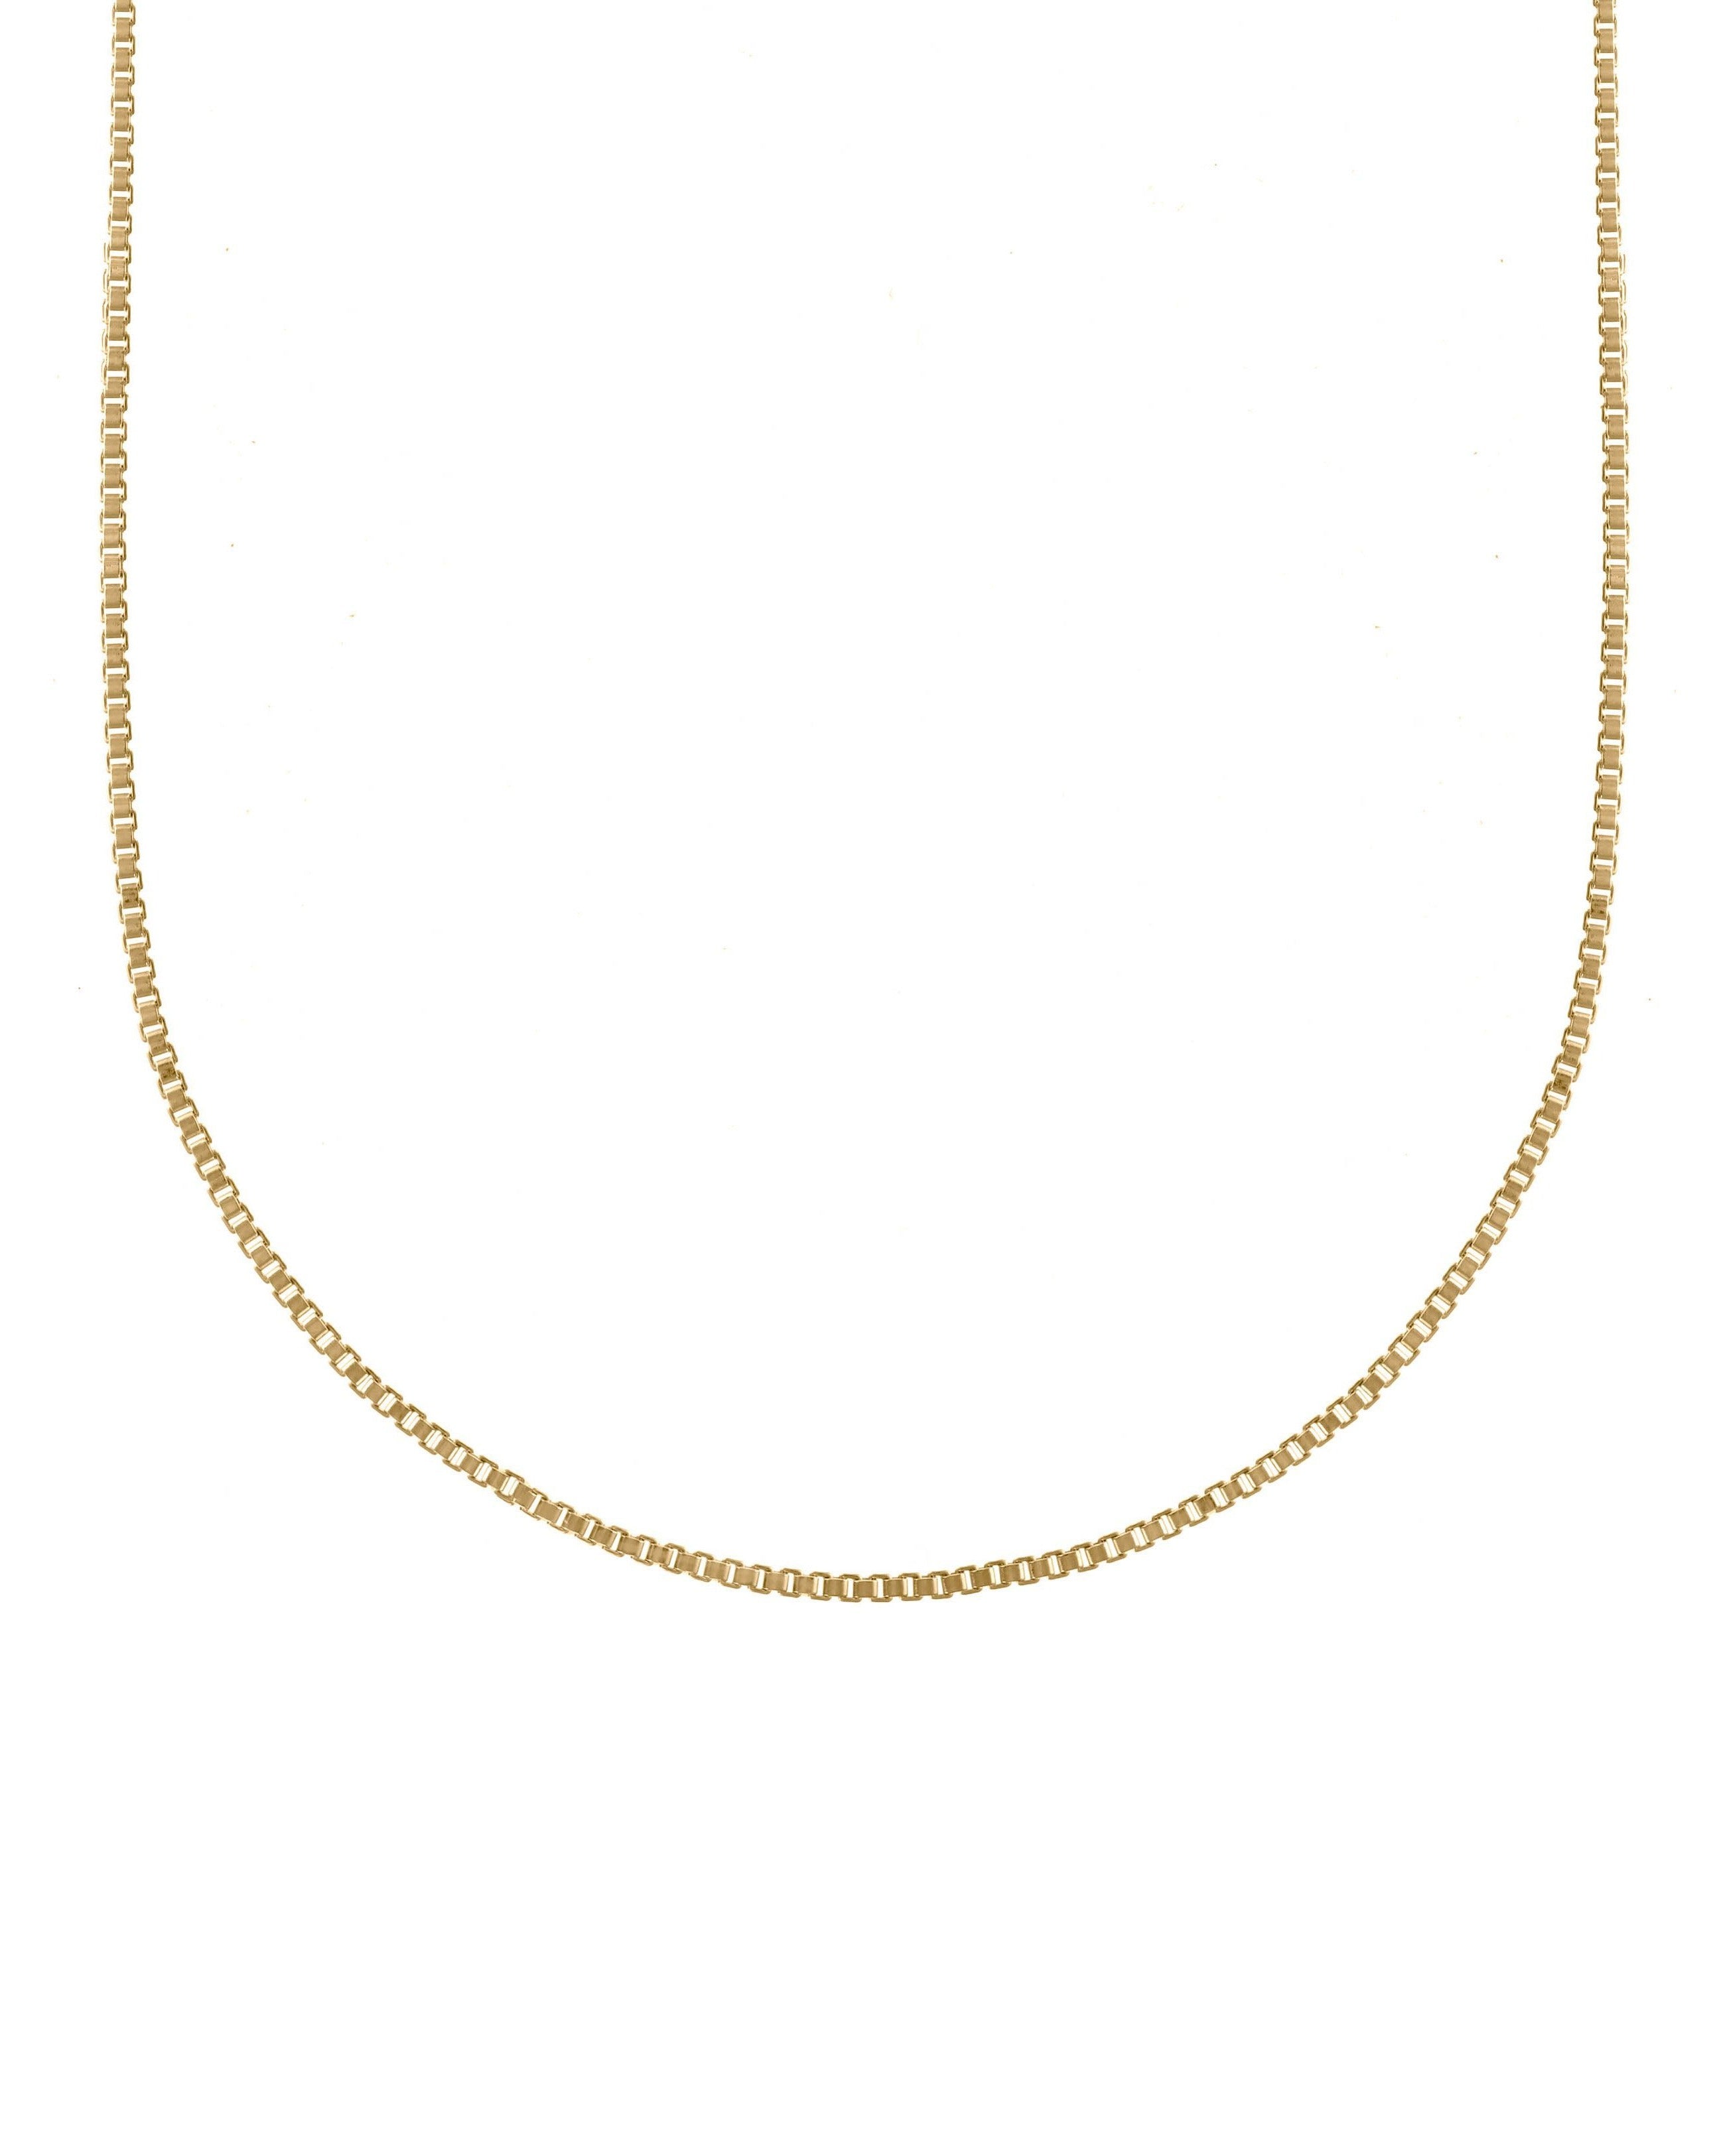 Jova Necklace by KOZAKH. A 14 to 16 inch adjustable length, 5mm Box chain necklace in 14K Gold Filled.